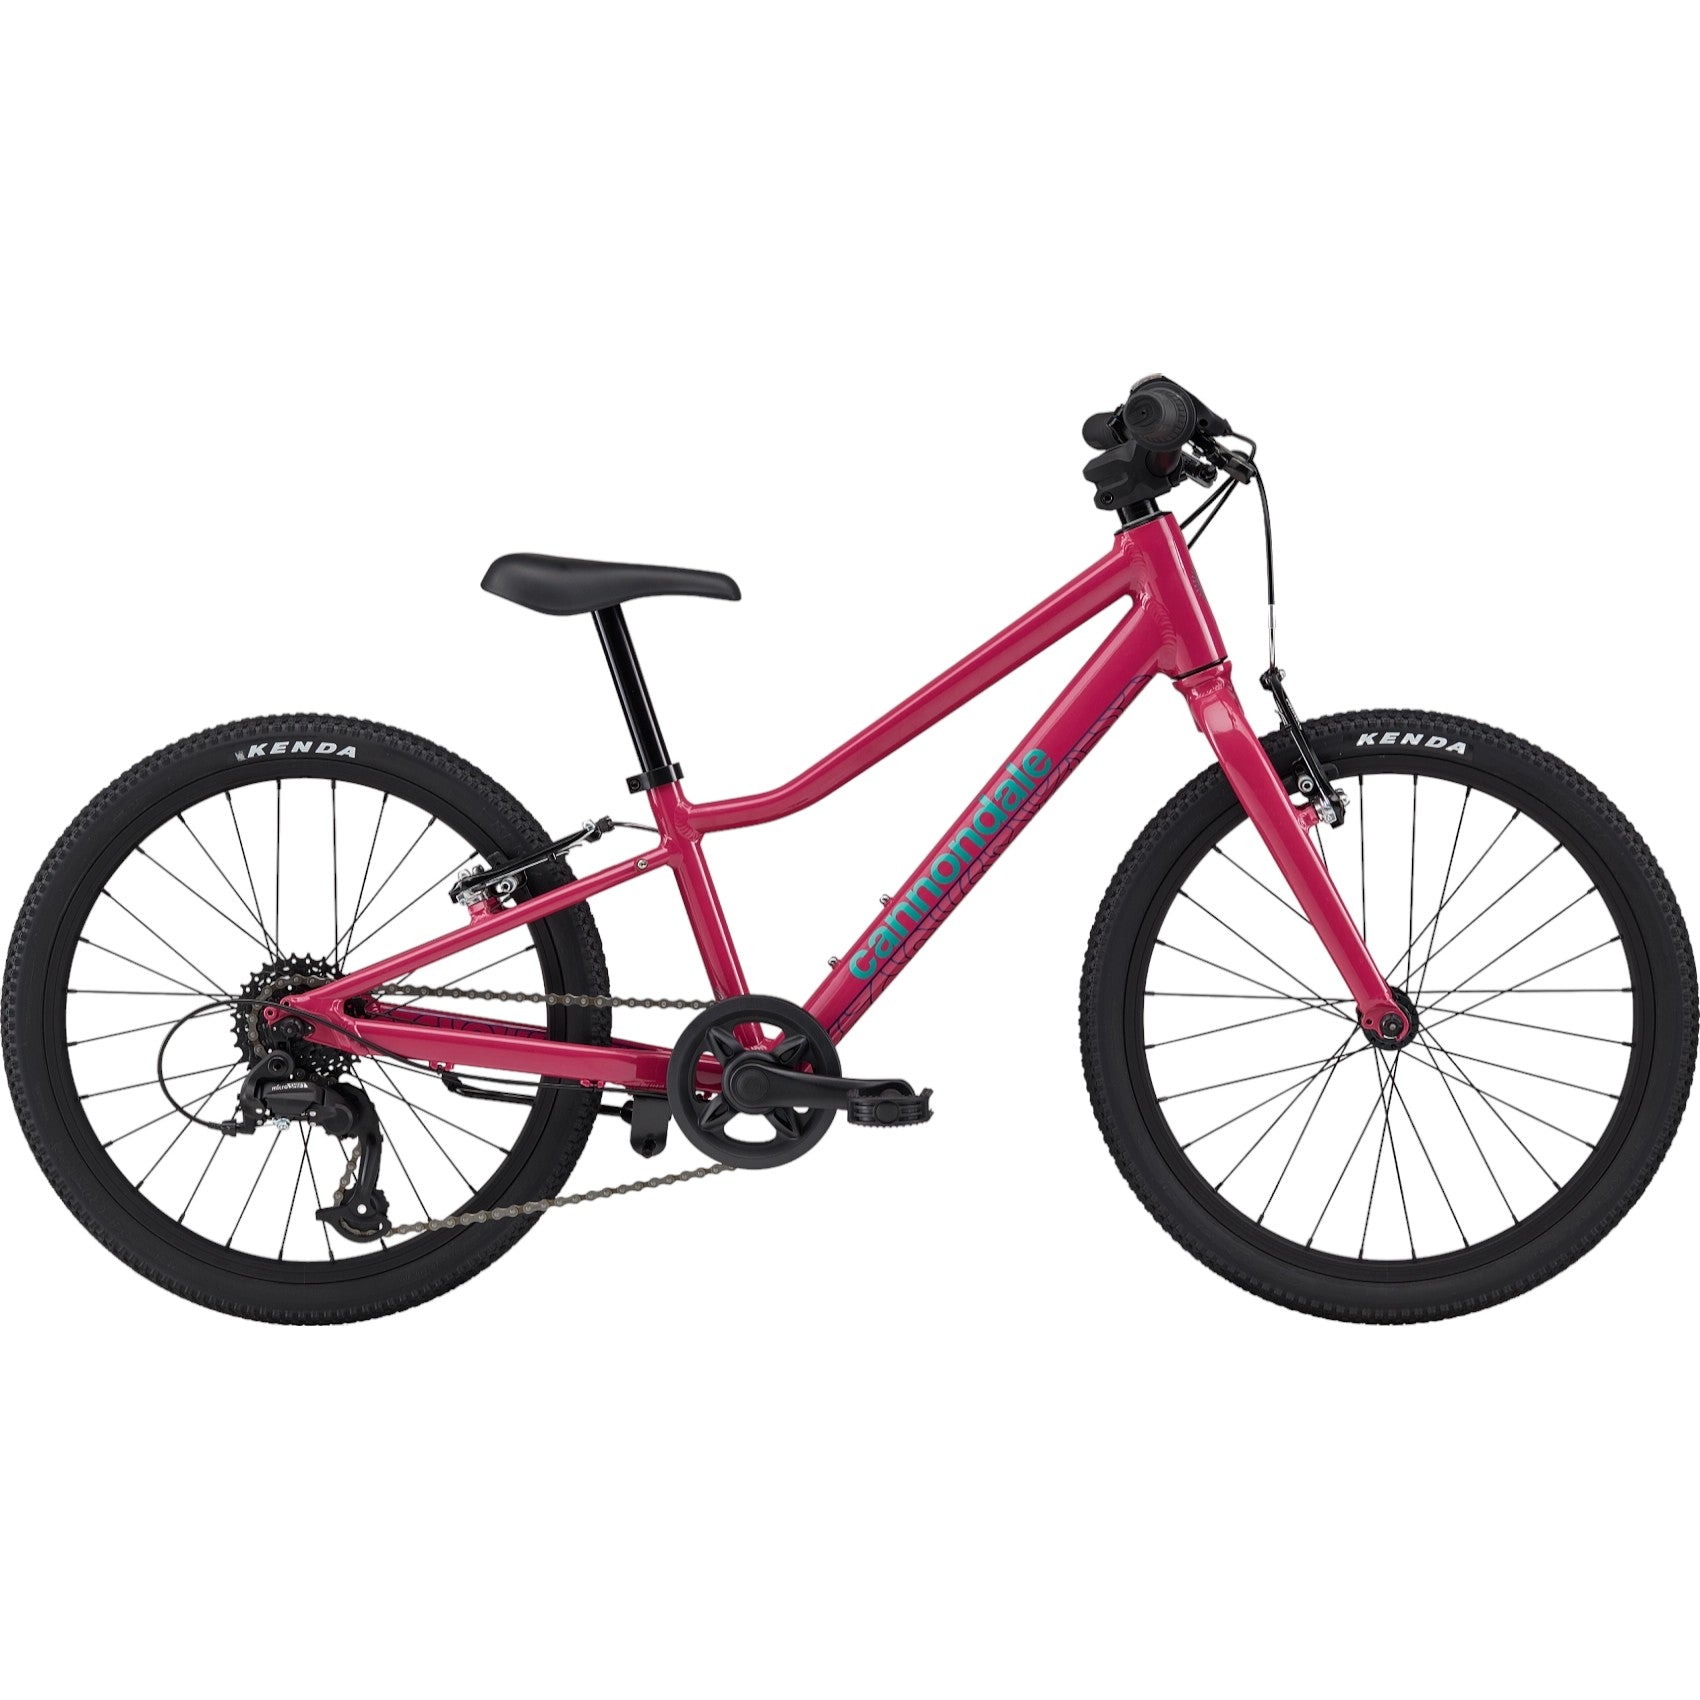 Cannondale Kids Quick 20 | Strictly Bicycles – Strictly Bicycles